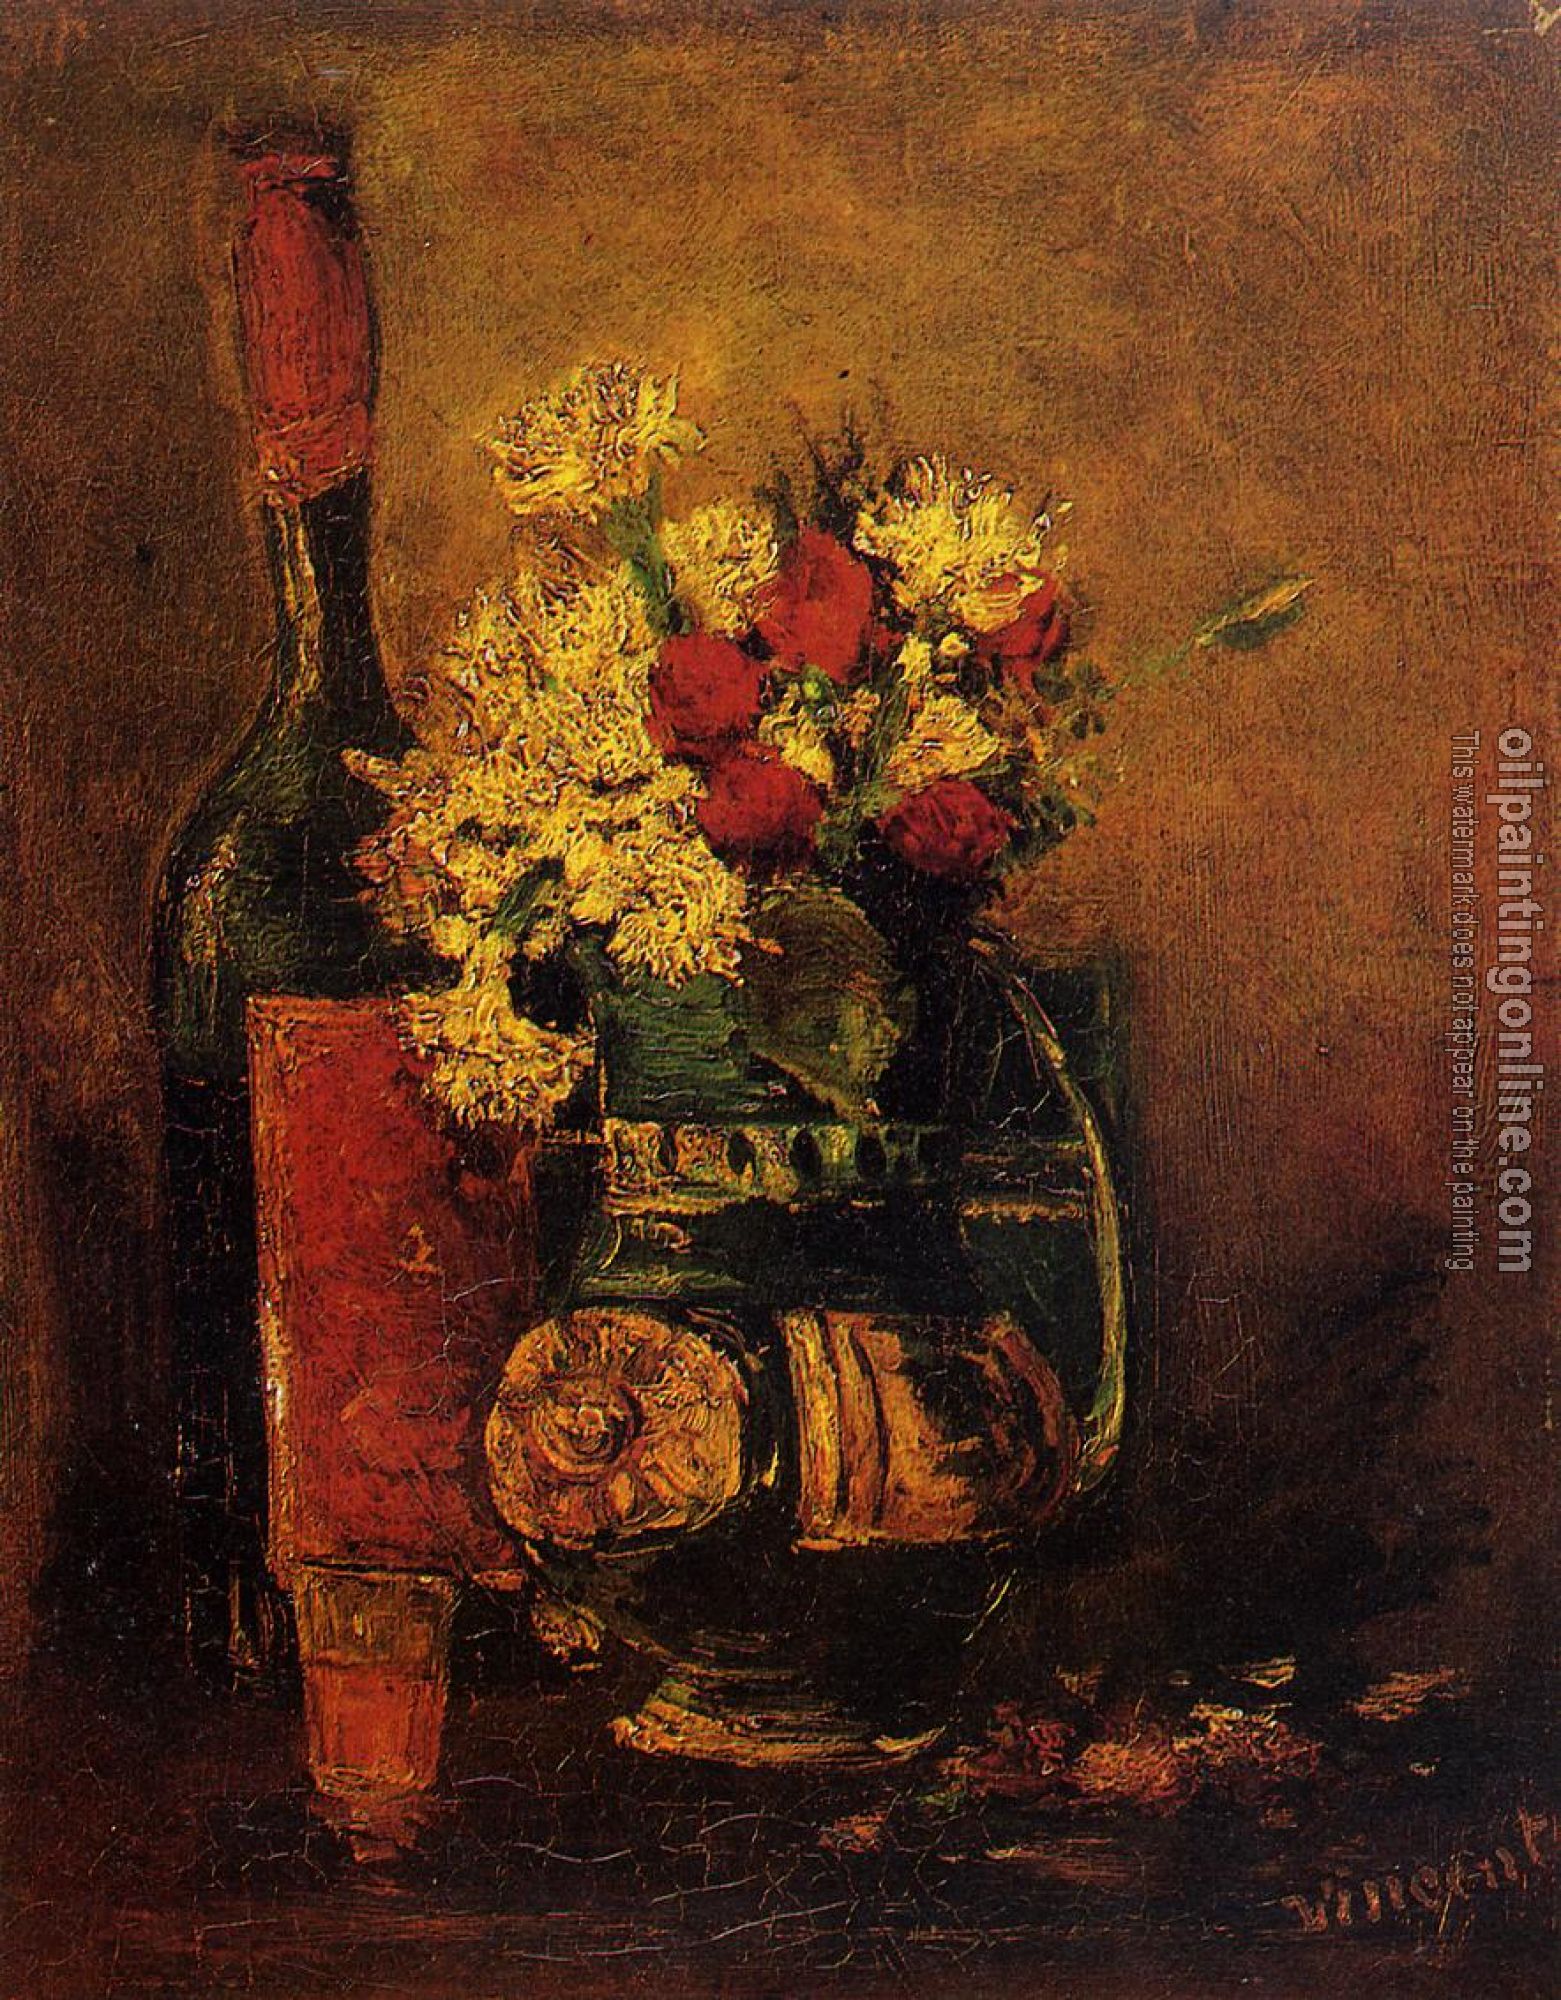 Gogh, Vincent van - Vase with Carnations and Roses and a Bottle